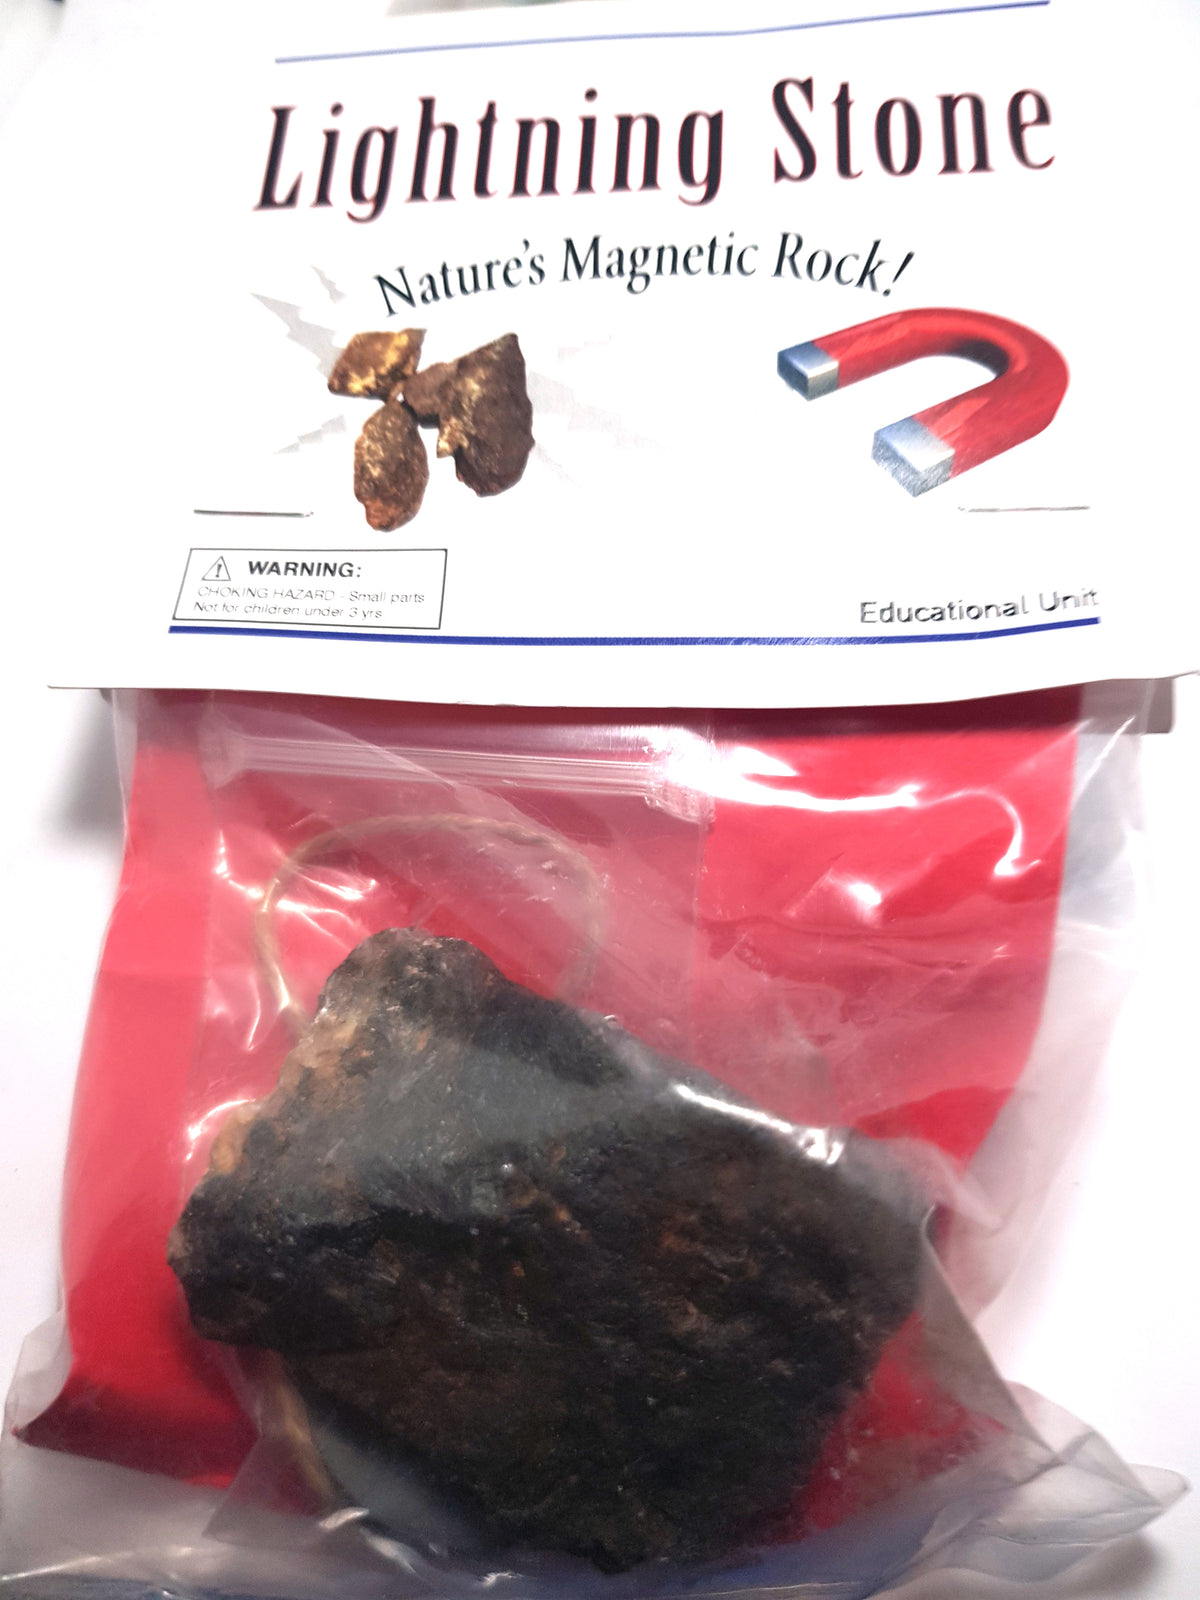 this product is prepackaged. The label says &quot;Lightning Stone -- nature&#39;s magnetic rock). The bag contains a large sample of magnetite, as well as some string and a magnet.